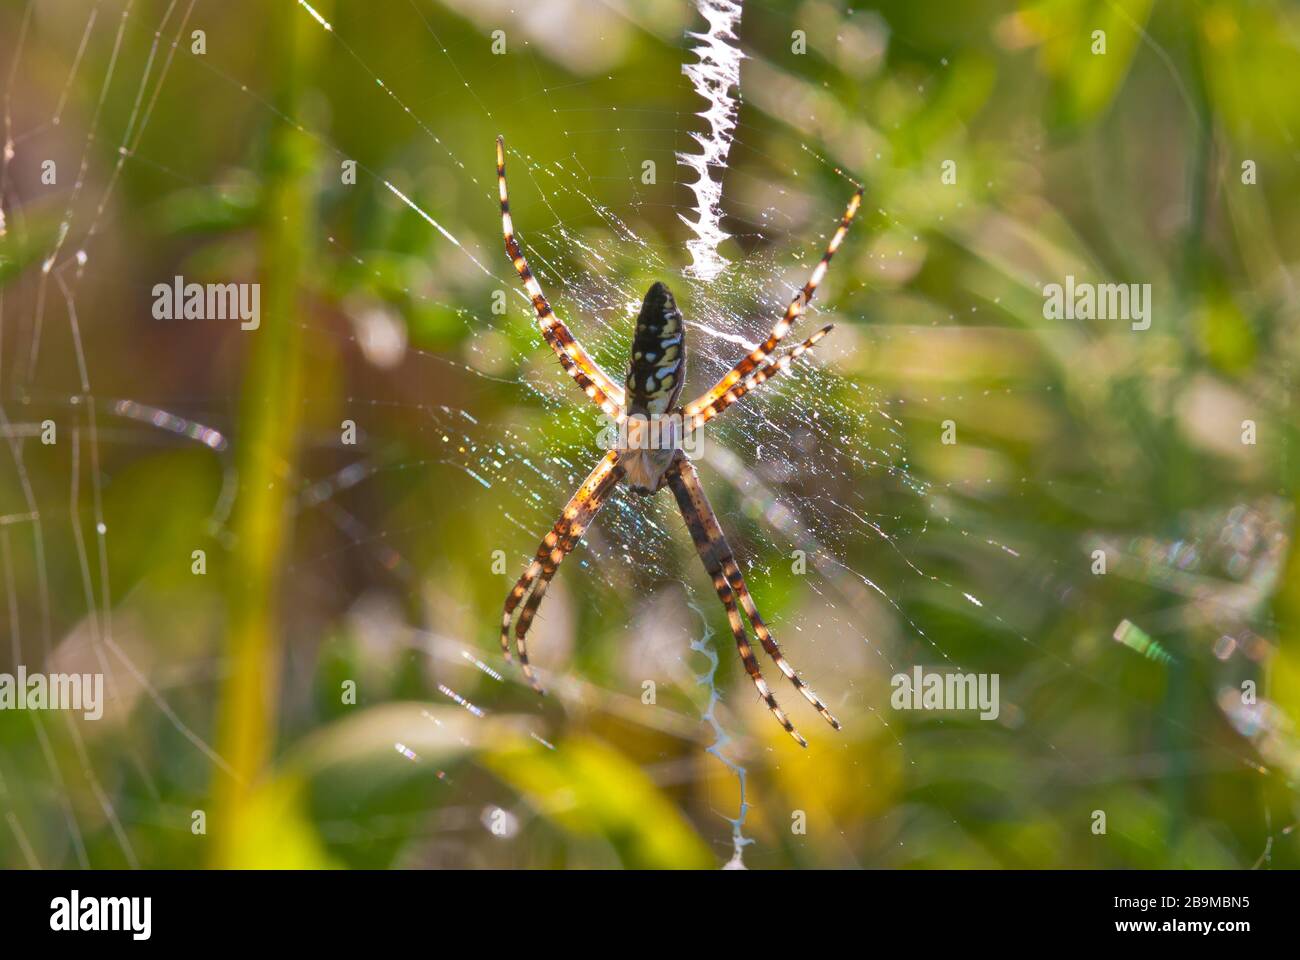 A black and yellow garden spider, Argiope aurantia, on its web in a wetland area in eastern Ontario, Canada. The stabilimentum is visible on the web. Stock Photo